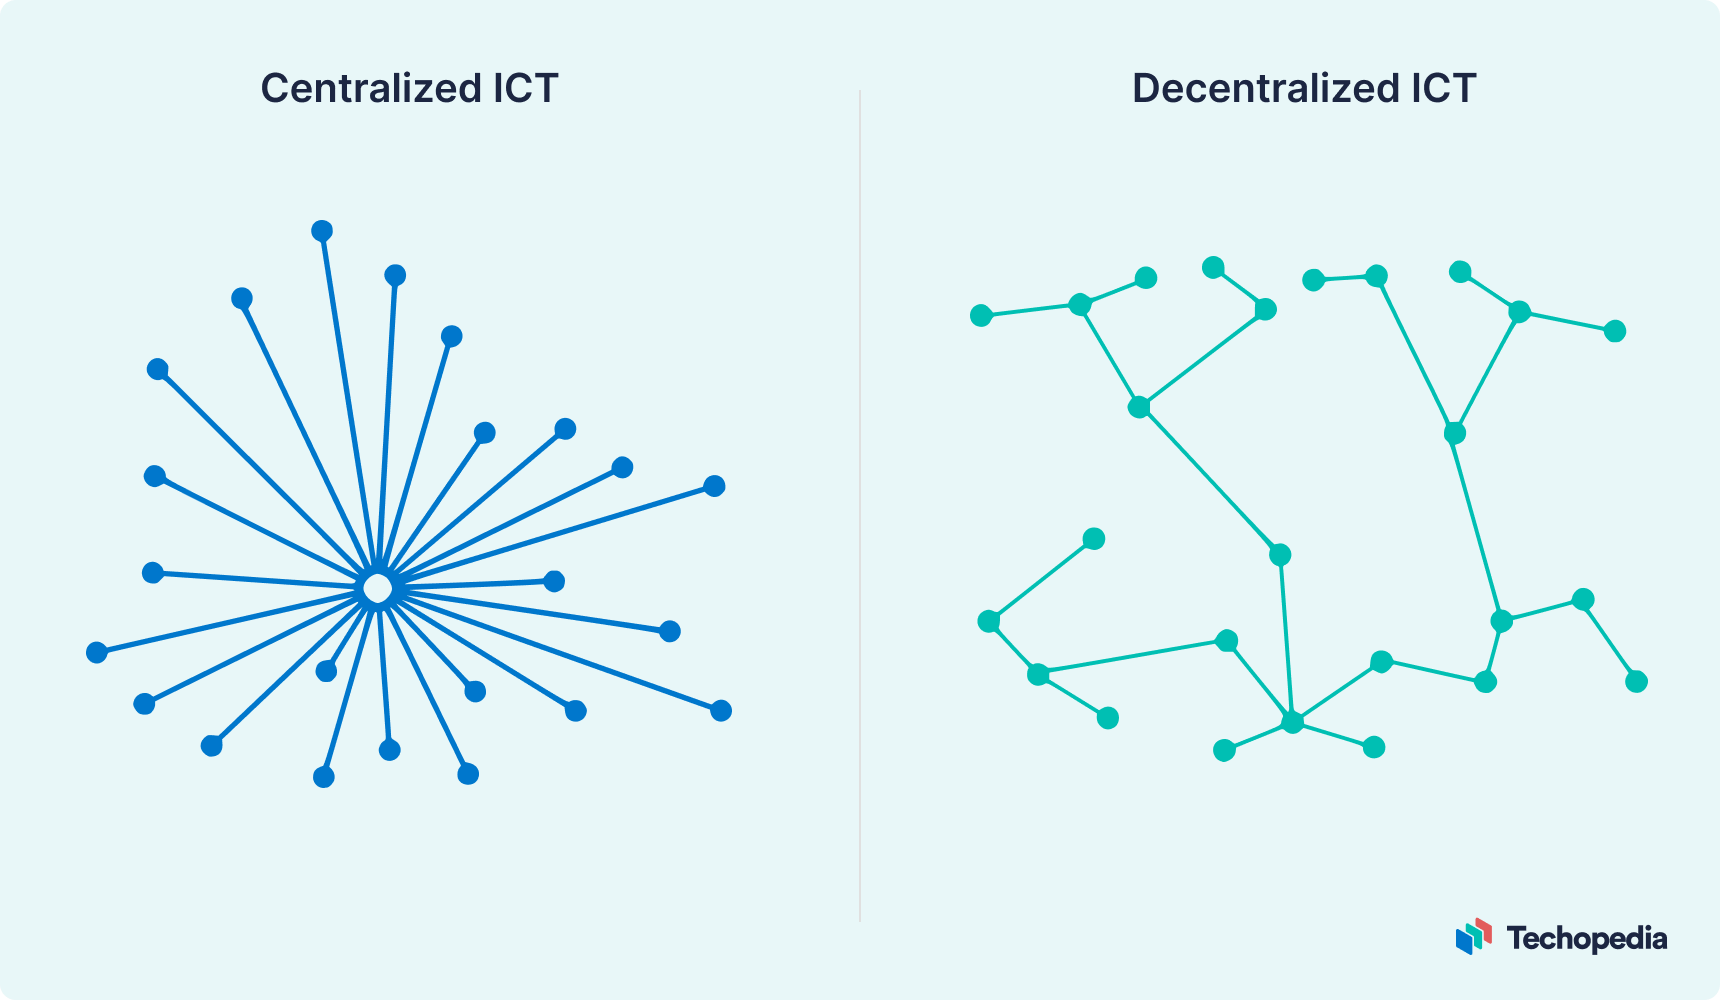 Network diagrams for centralized and decentralized ICT.